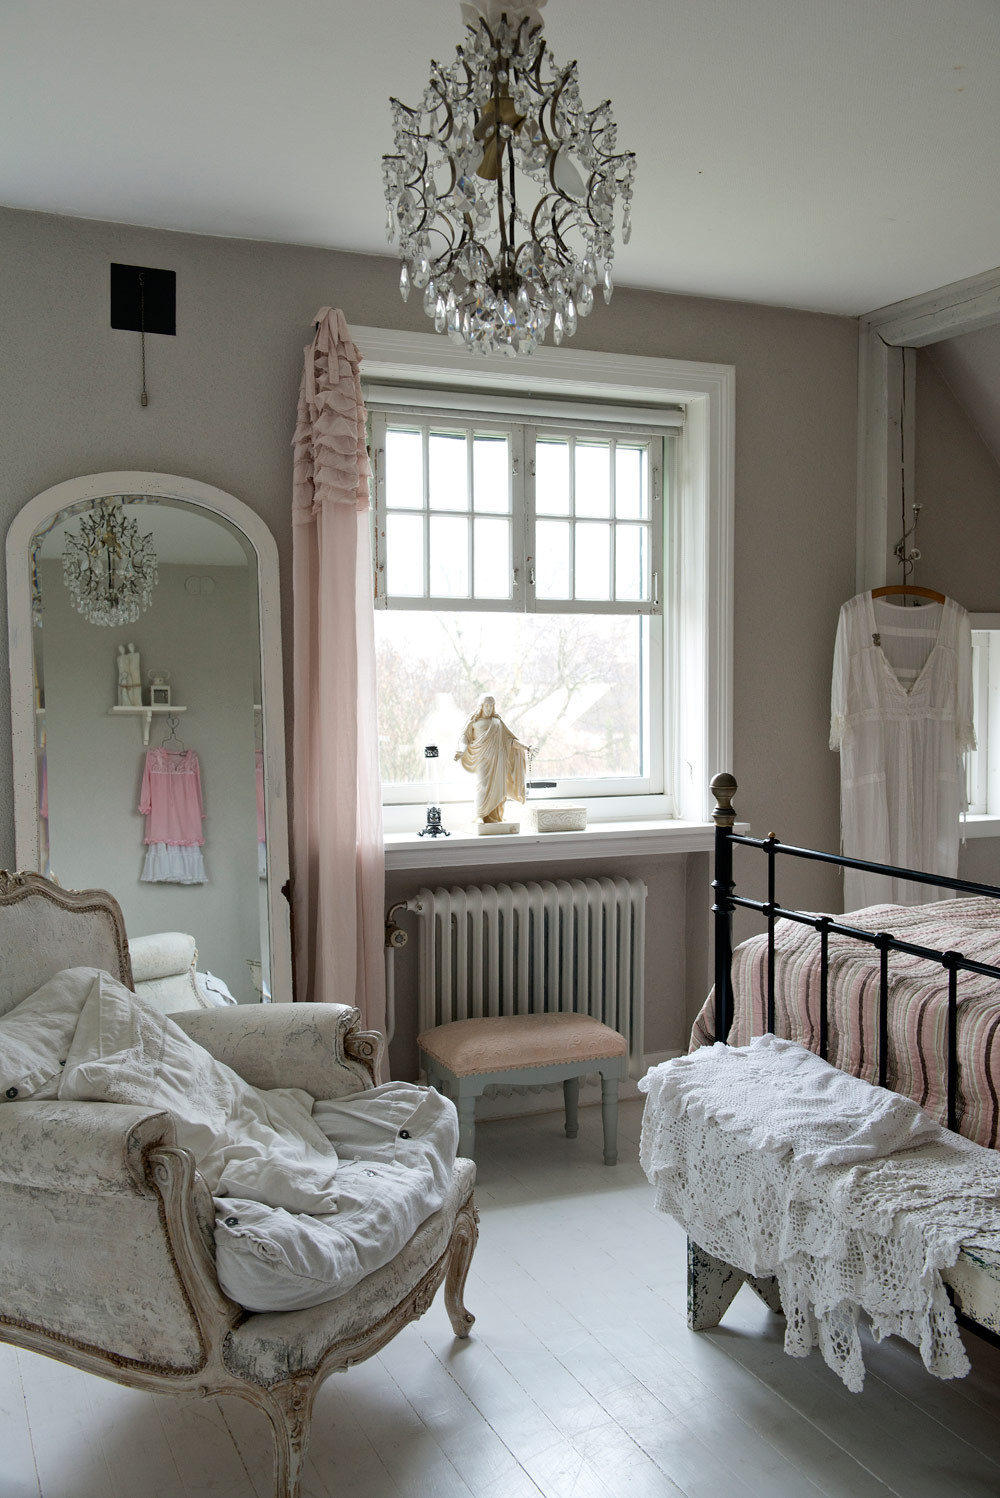 French Shabby Chic Bedroom Ideas
 Gin Design Room Shabby Chic Inspiration